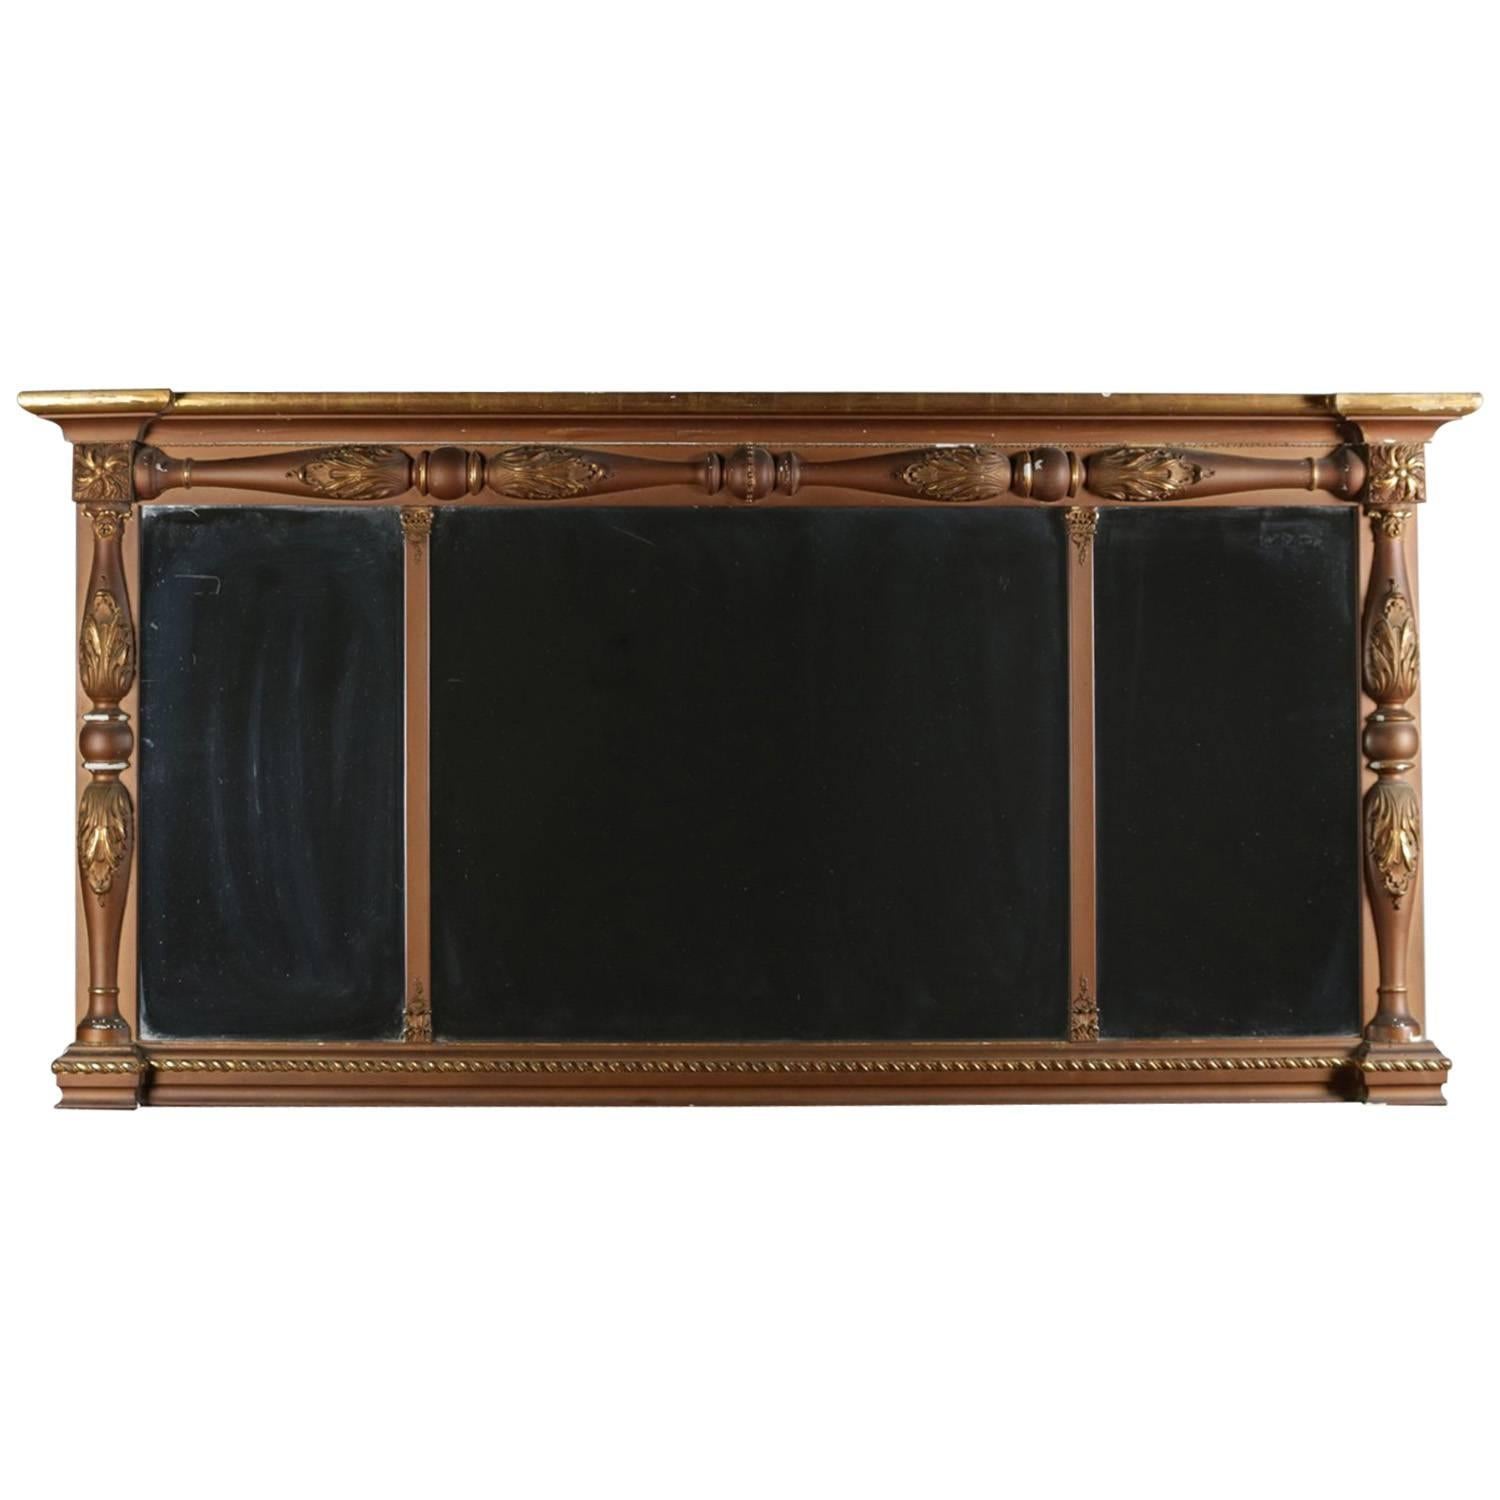 Empire Gilt Classical and Foliate Carved Triptych over Mantel Mirror